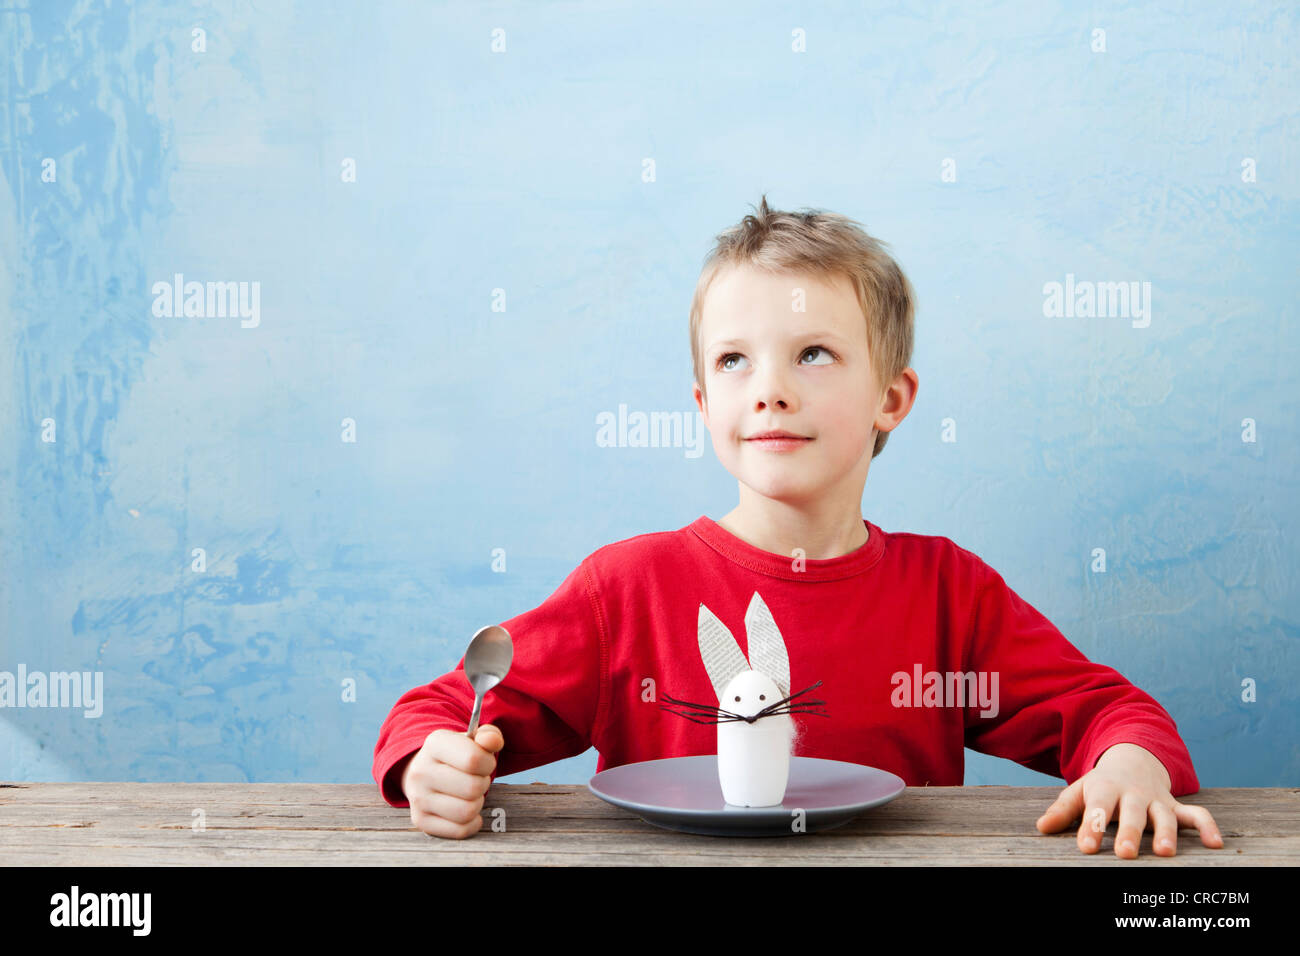 Boy with rabbit decoration on plate Stock Photo